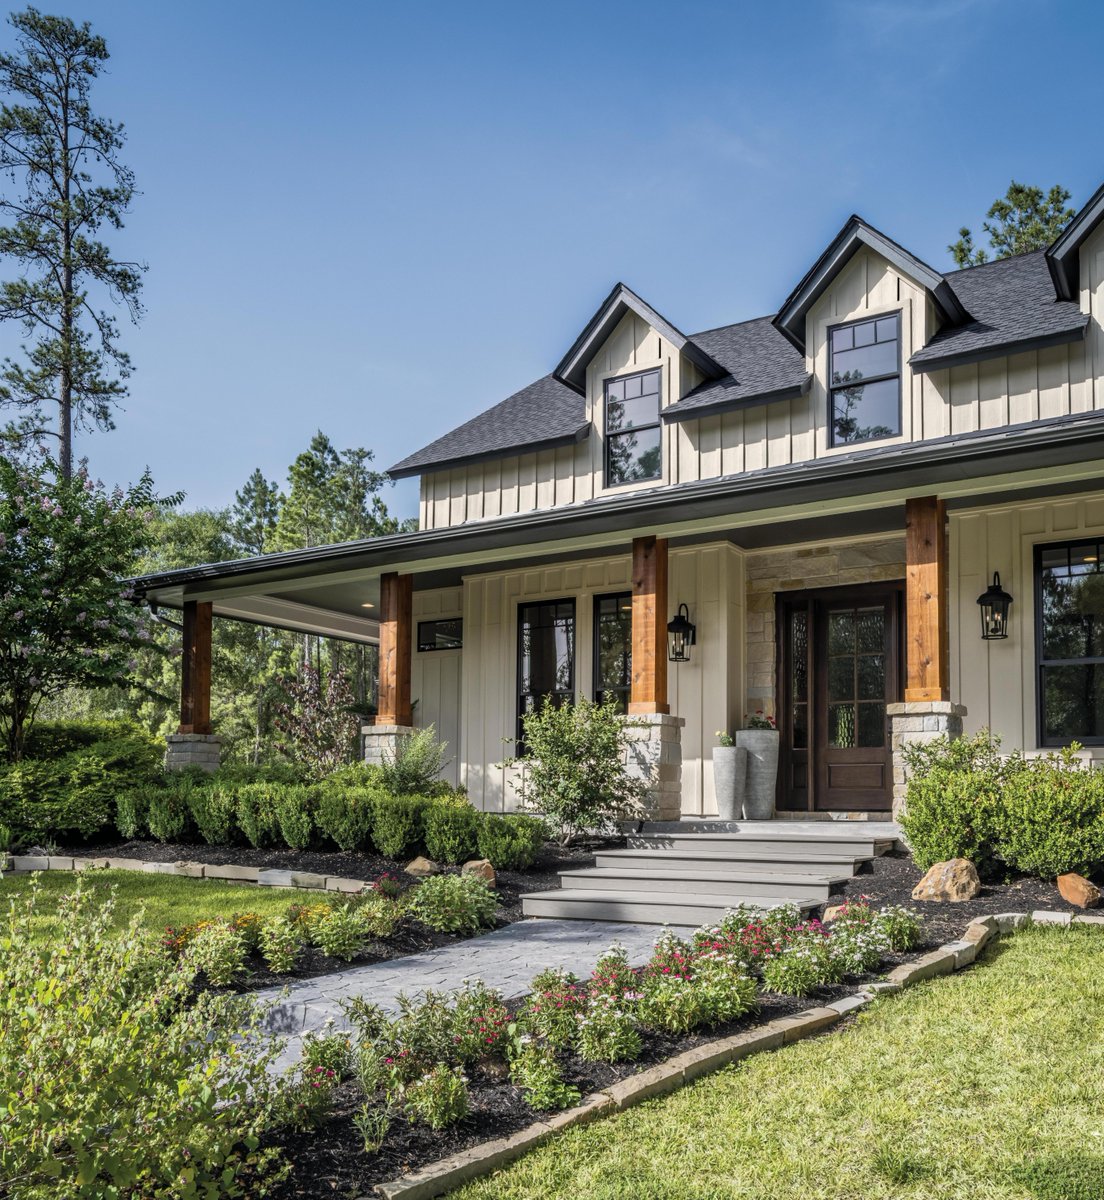 Forbes Magazine’s top #ExteriorDesign trends are in and products by #JamesHardie made the list! Learn more on why homeowners choose Hardie® fiber cement siding for a #sustainable solution that’s #durable and stands up to the elements. 

forbes.com/home-improveme…